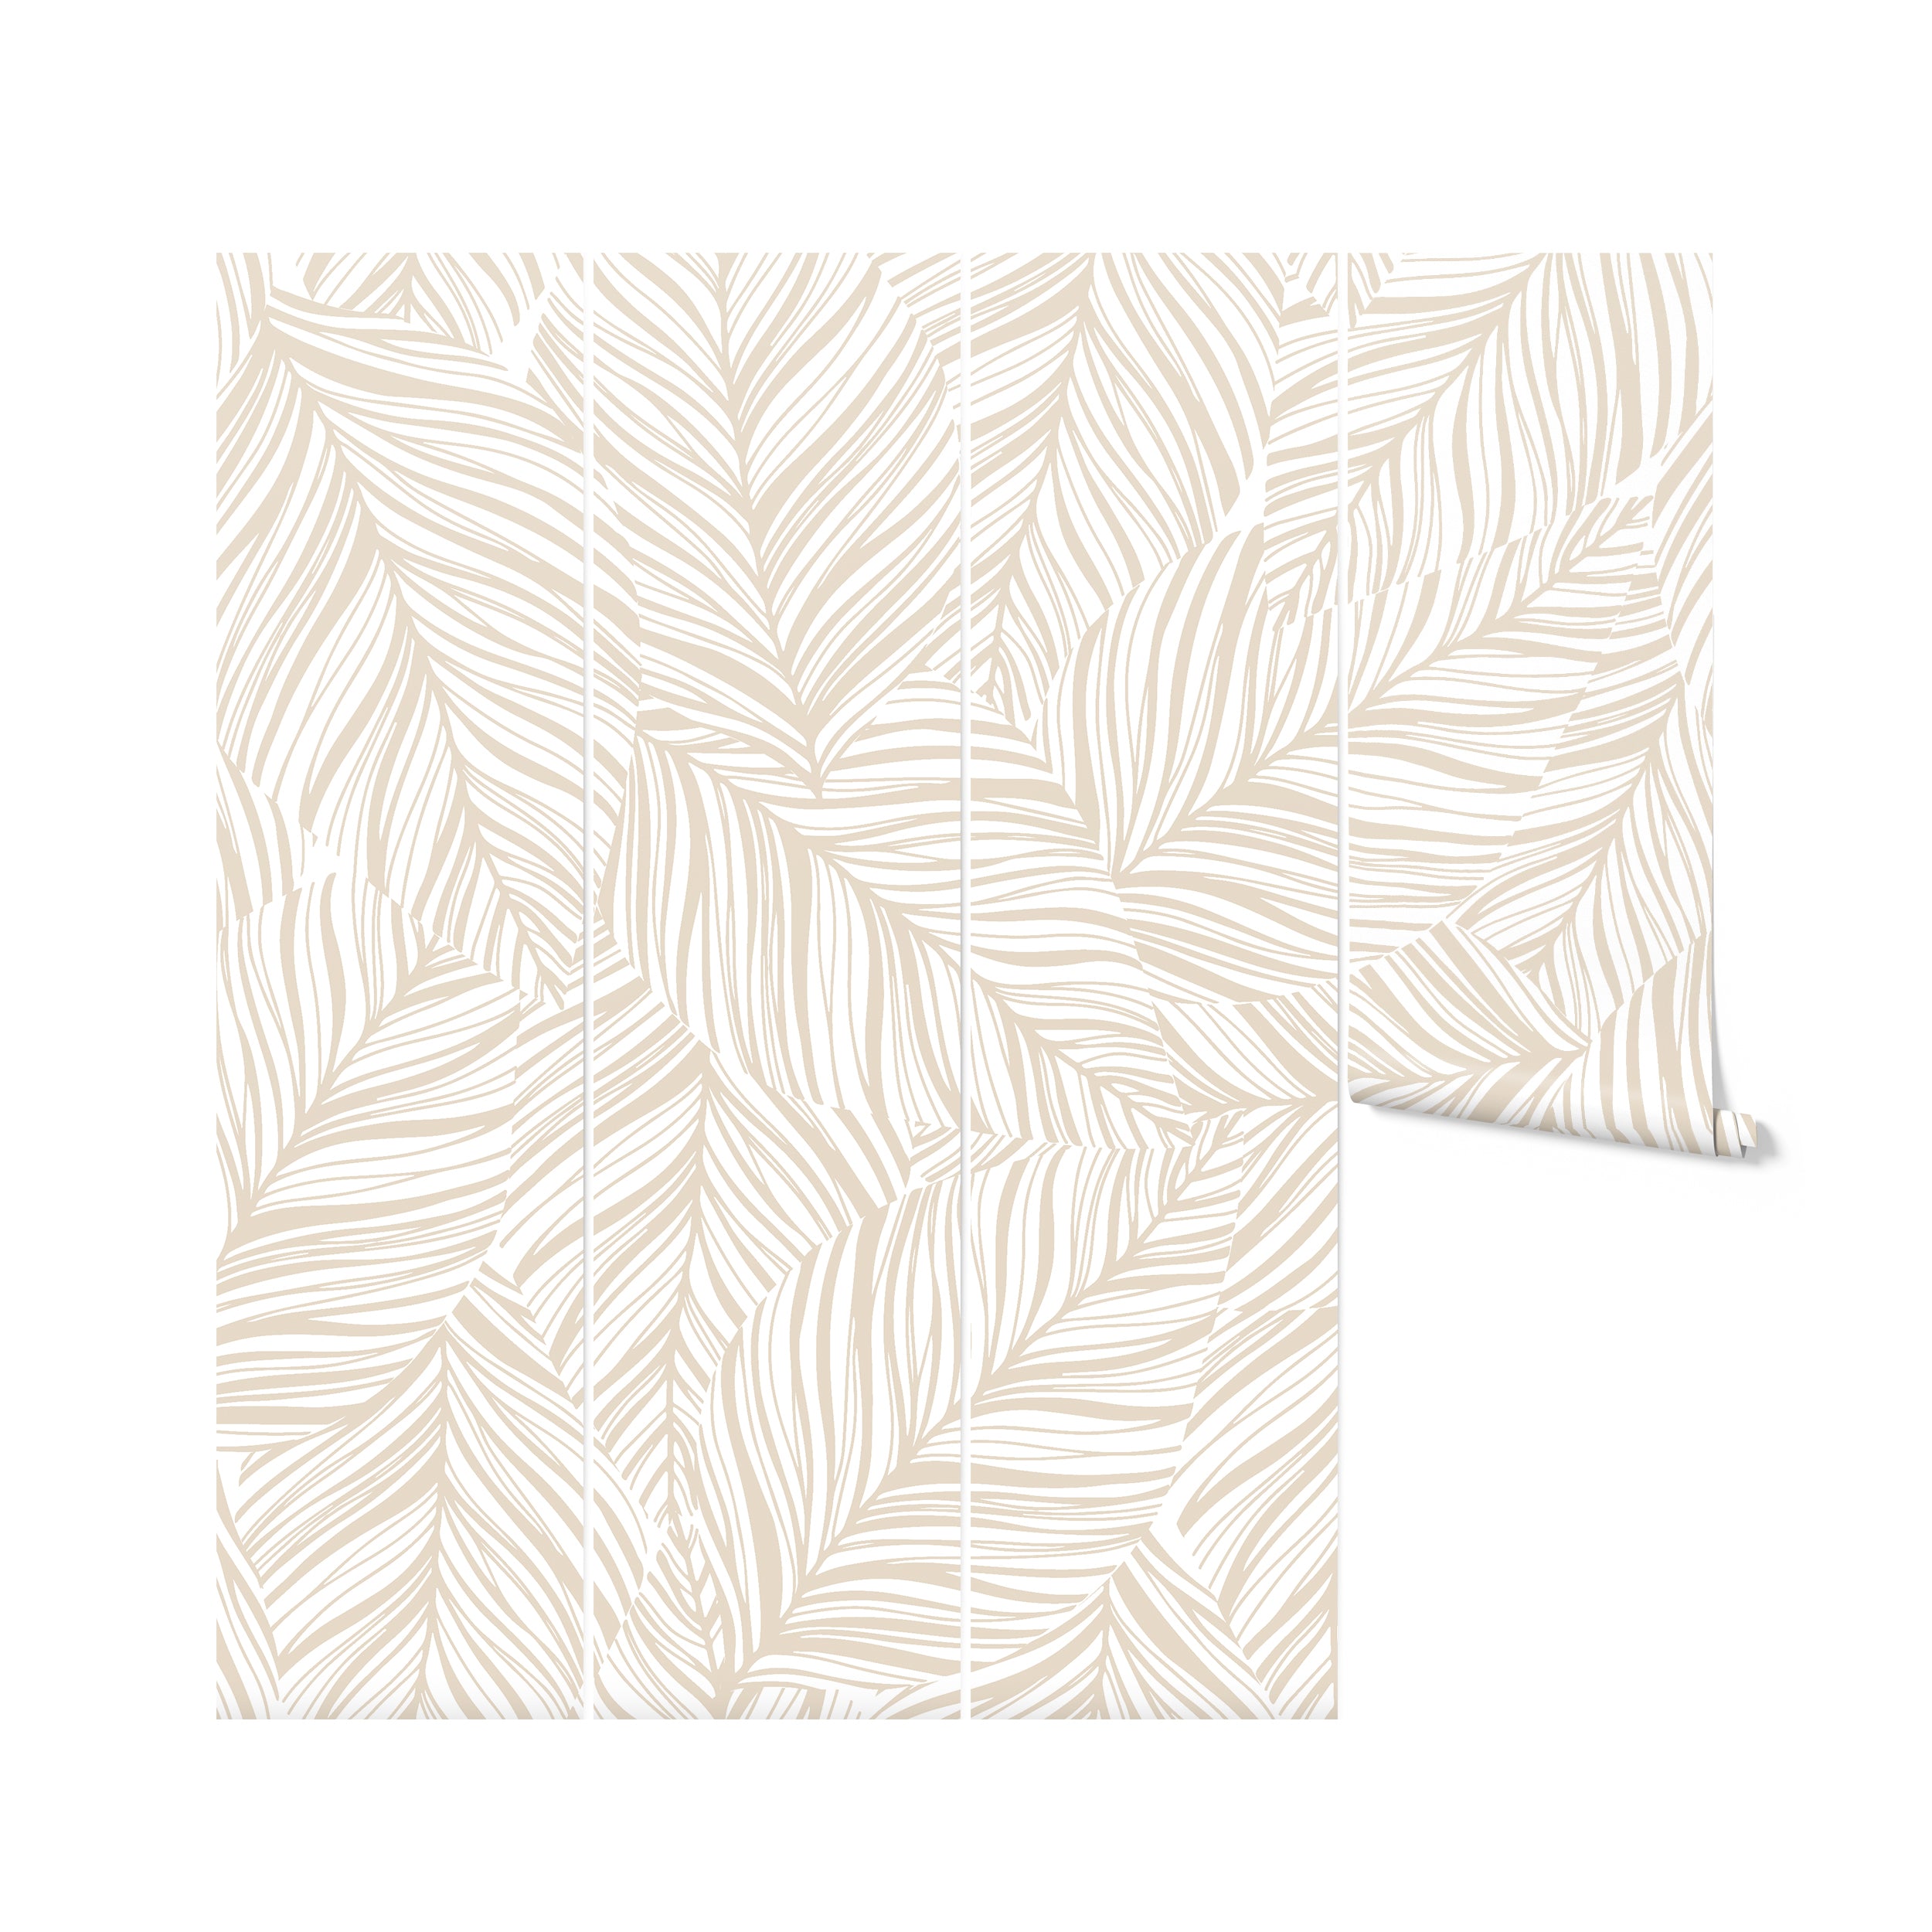 Rolled up view of Abstract Leaf Wallpaper showcasing a continuous leaf pattern in beige, ready to be installed. The wallpaper exudes a subtle elegance and natural charm, ideal for adding a botanical touch to any interior.